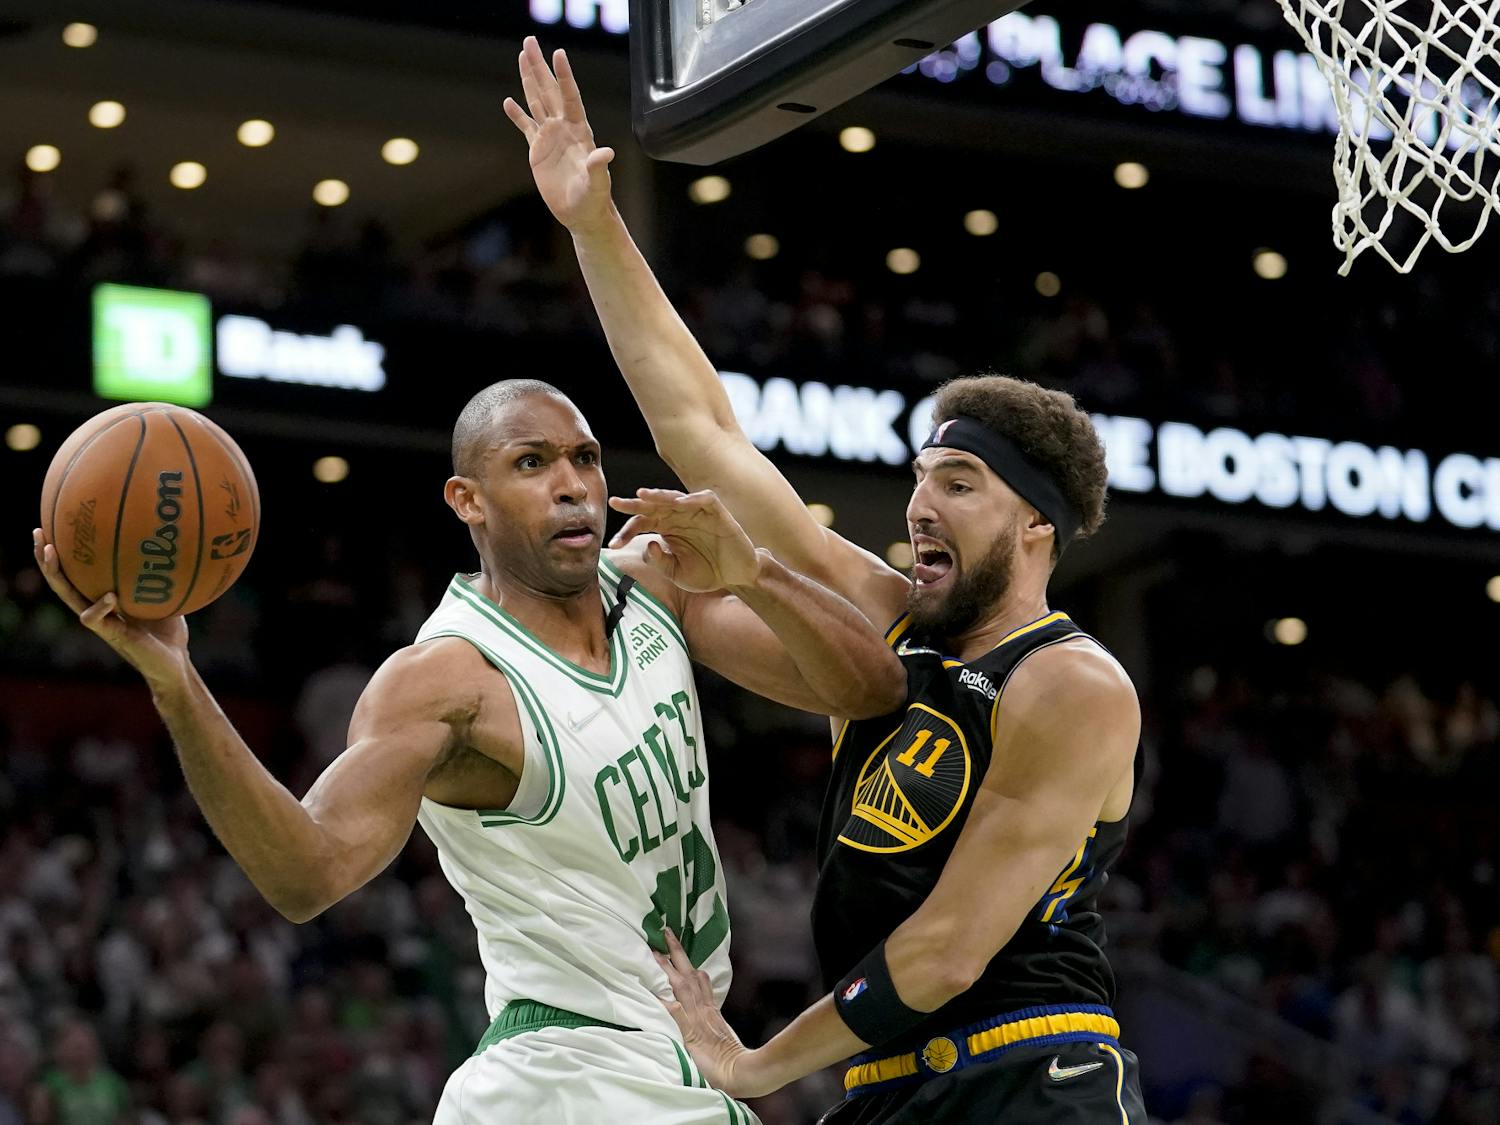 Boston Celtics center Al Horford looks to pass against Golden State Warriors guard Klay Thompson during the second quarter of Game 4 of the NBA Finals, June 10, 2022. (AP Photo/Steven Senne)